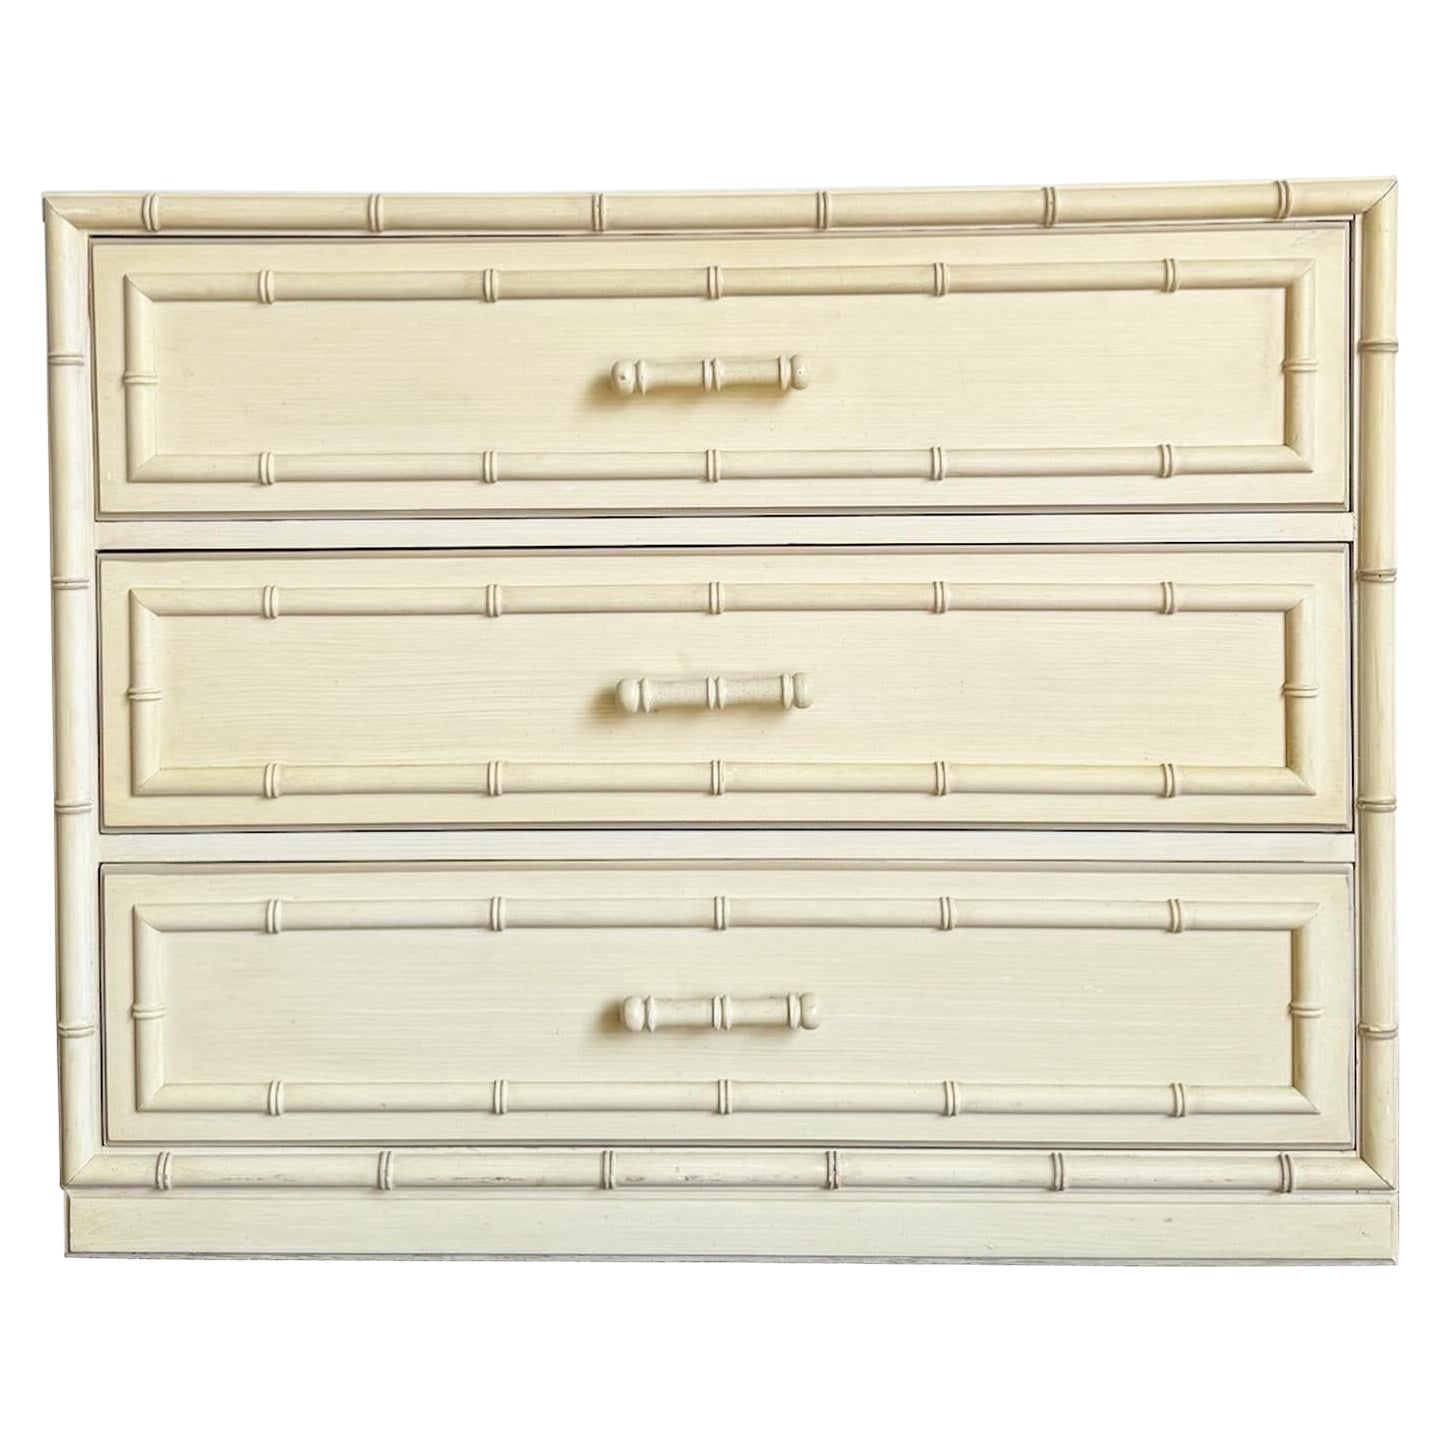 Regency Chic "Aloha" Chest of Drawers by Dixie For Sale